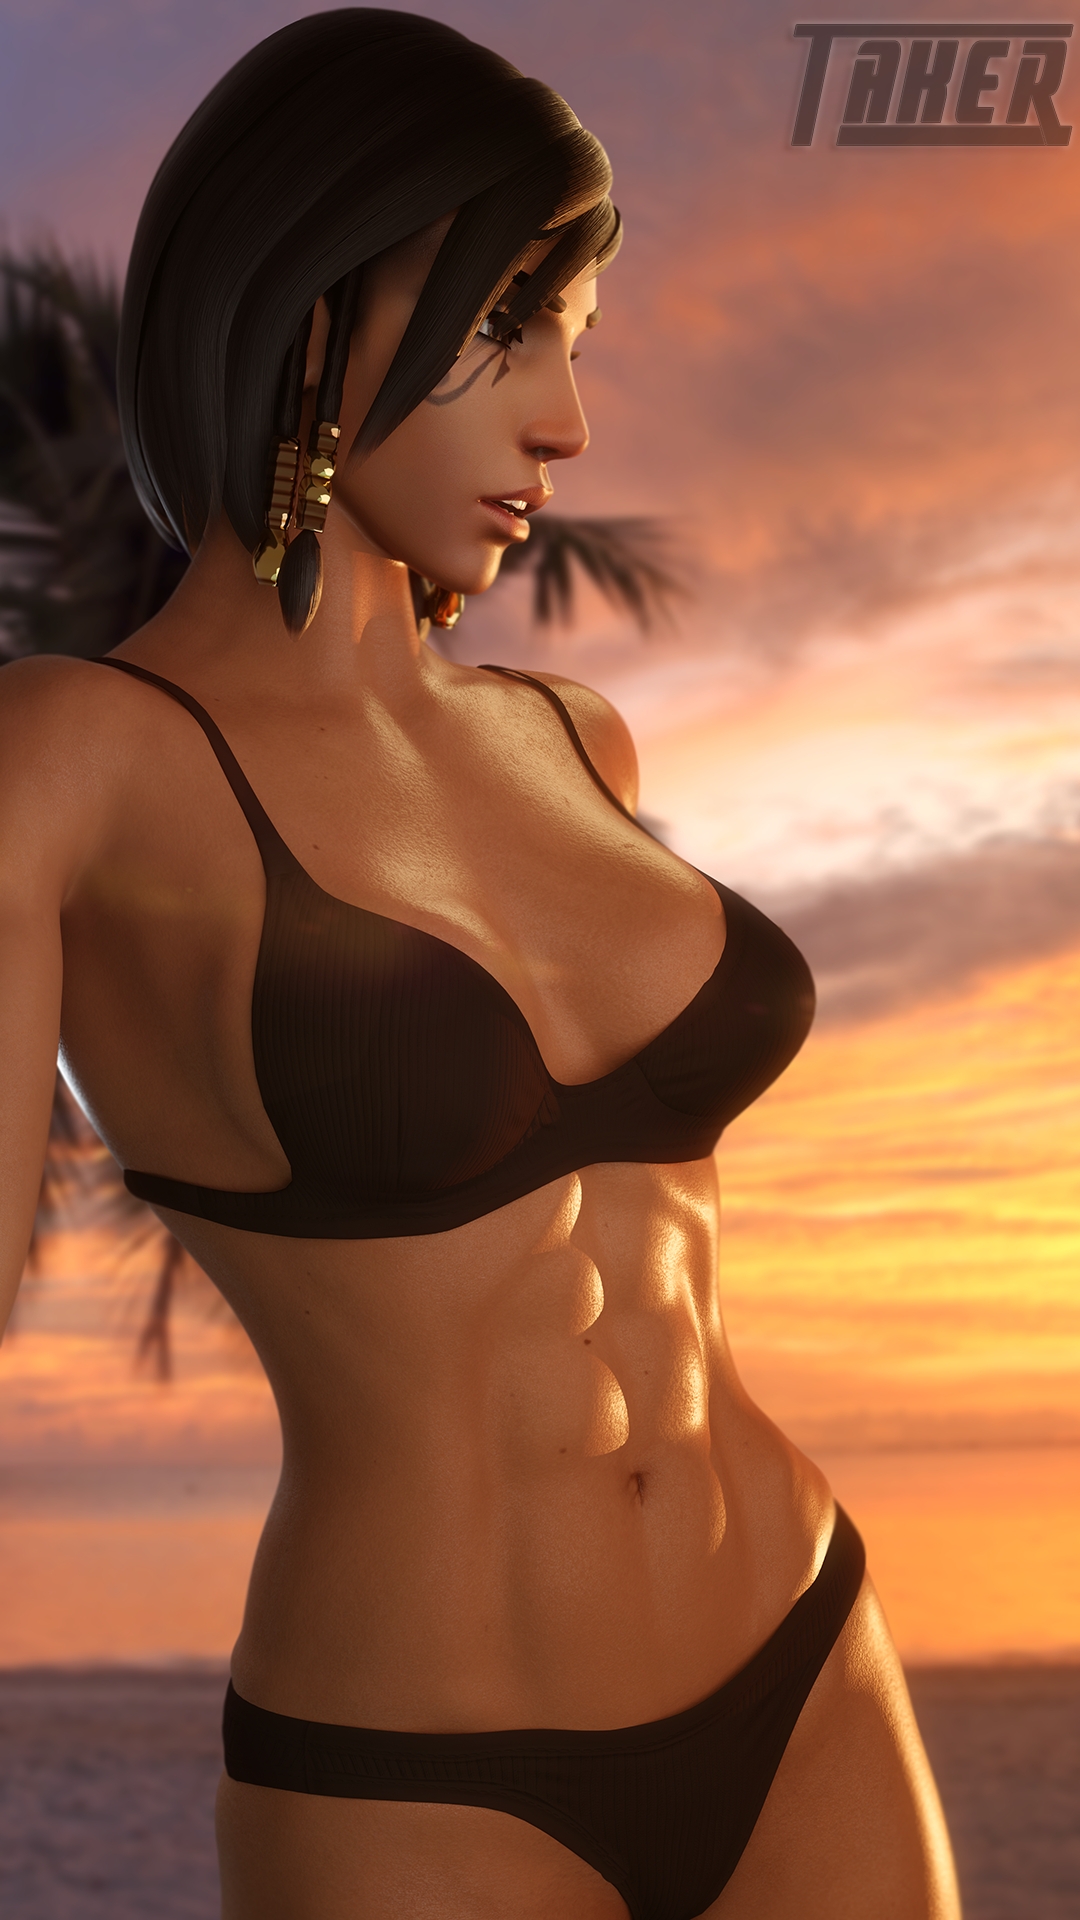 Watching the sunset with a beautiful lady - what could be better? Overwatch Pharah 3d Porn 3d Girl Nude Naked Sexy Abs Fit Nipples Pussy Swimsuit Beach 2